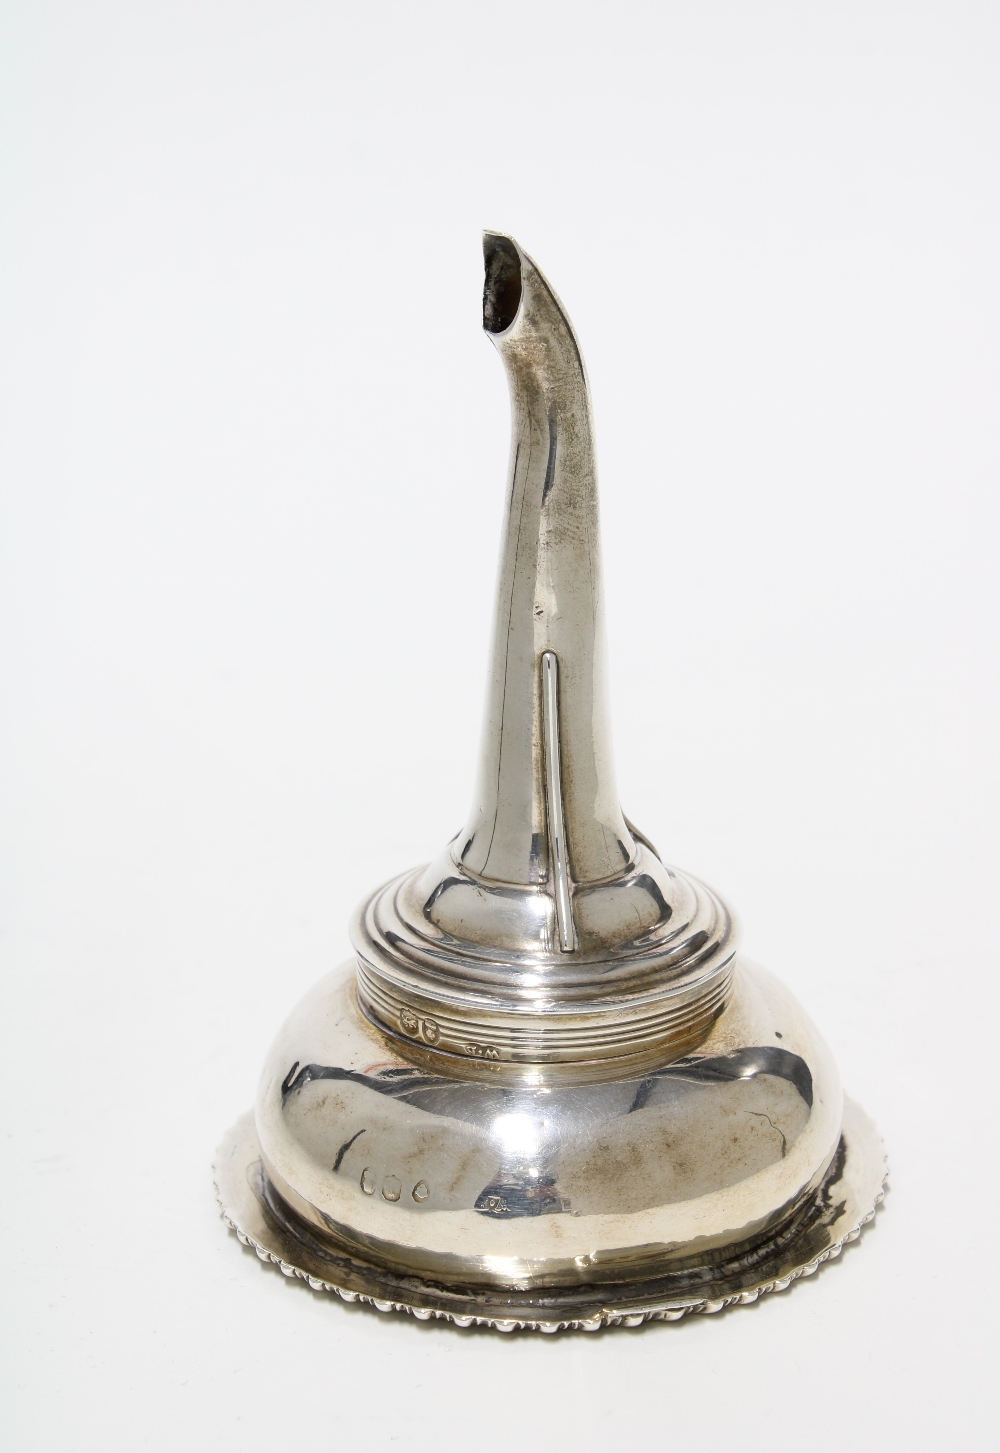 George IV silver wine funnel, Walter Brind, London 1826, with gadrooned rim and detachable spout, - Image 2 of 3